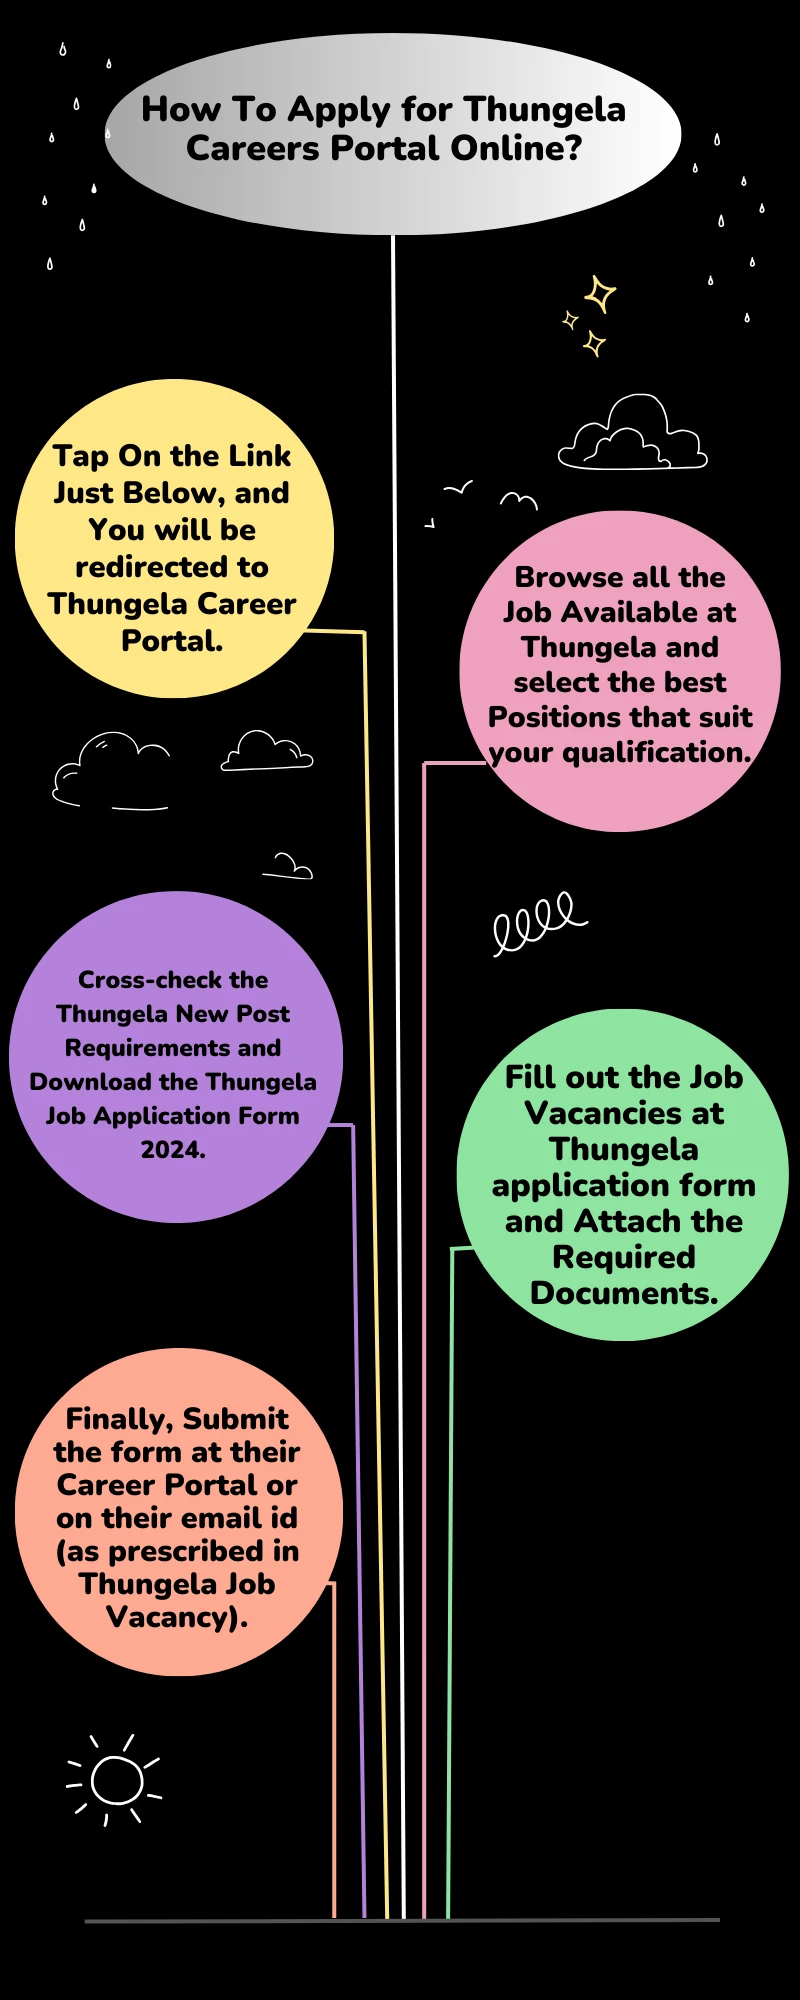 How To Apply for Thungela Careers Portal Online?